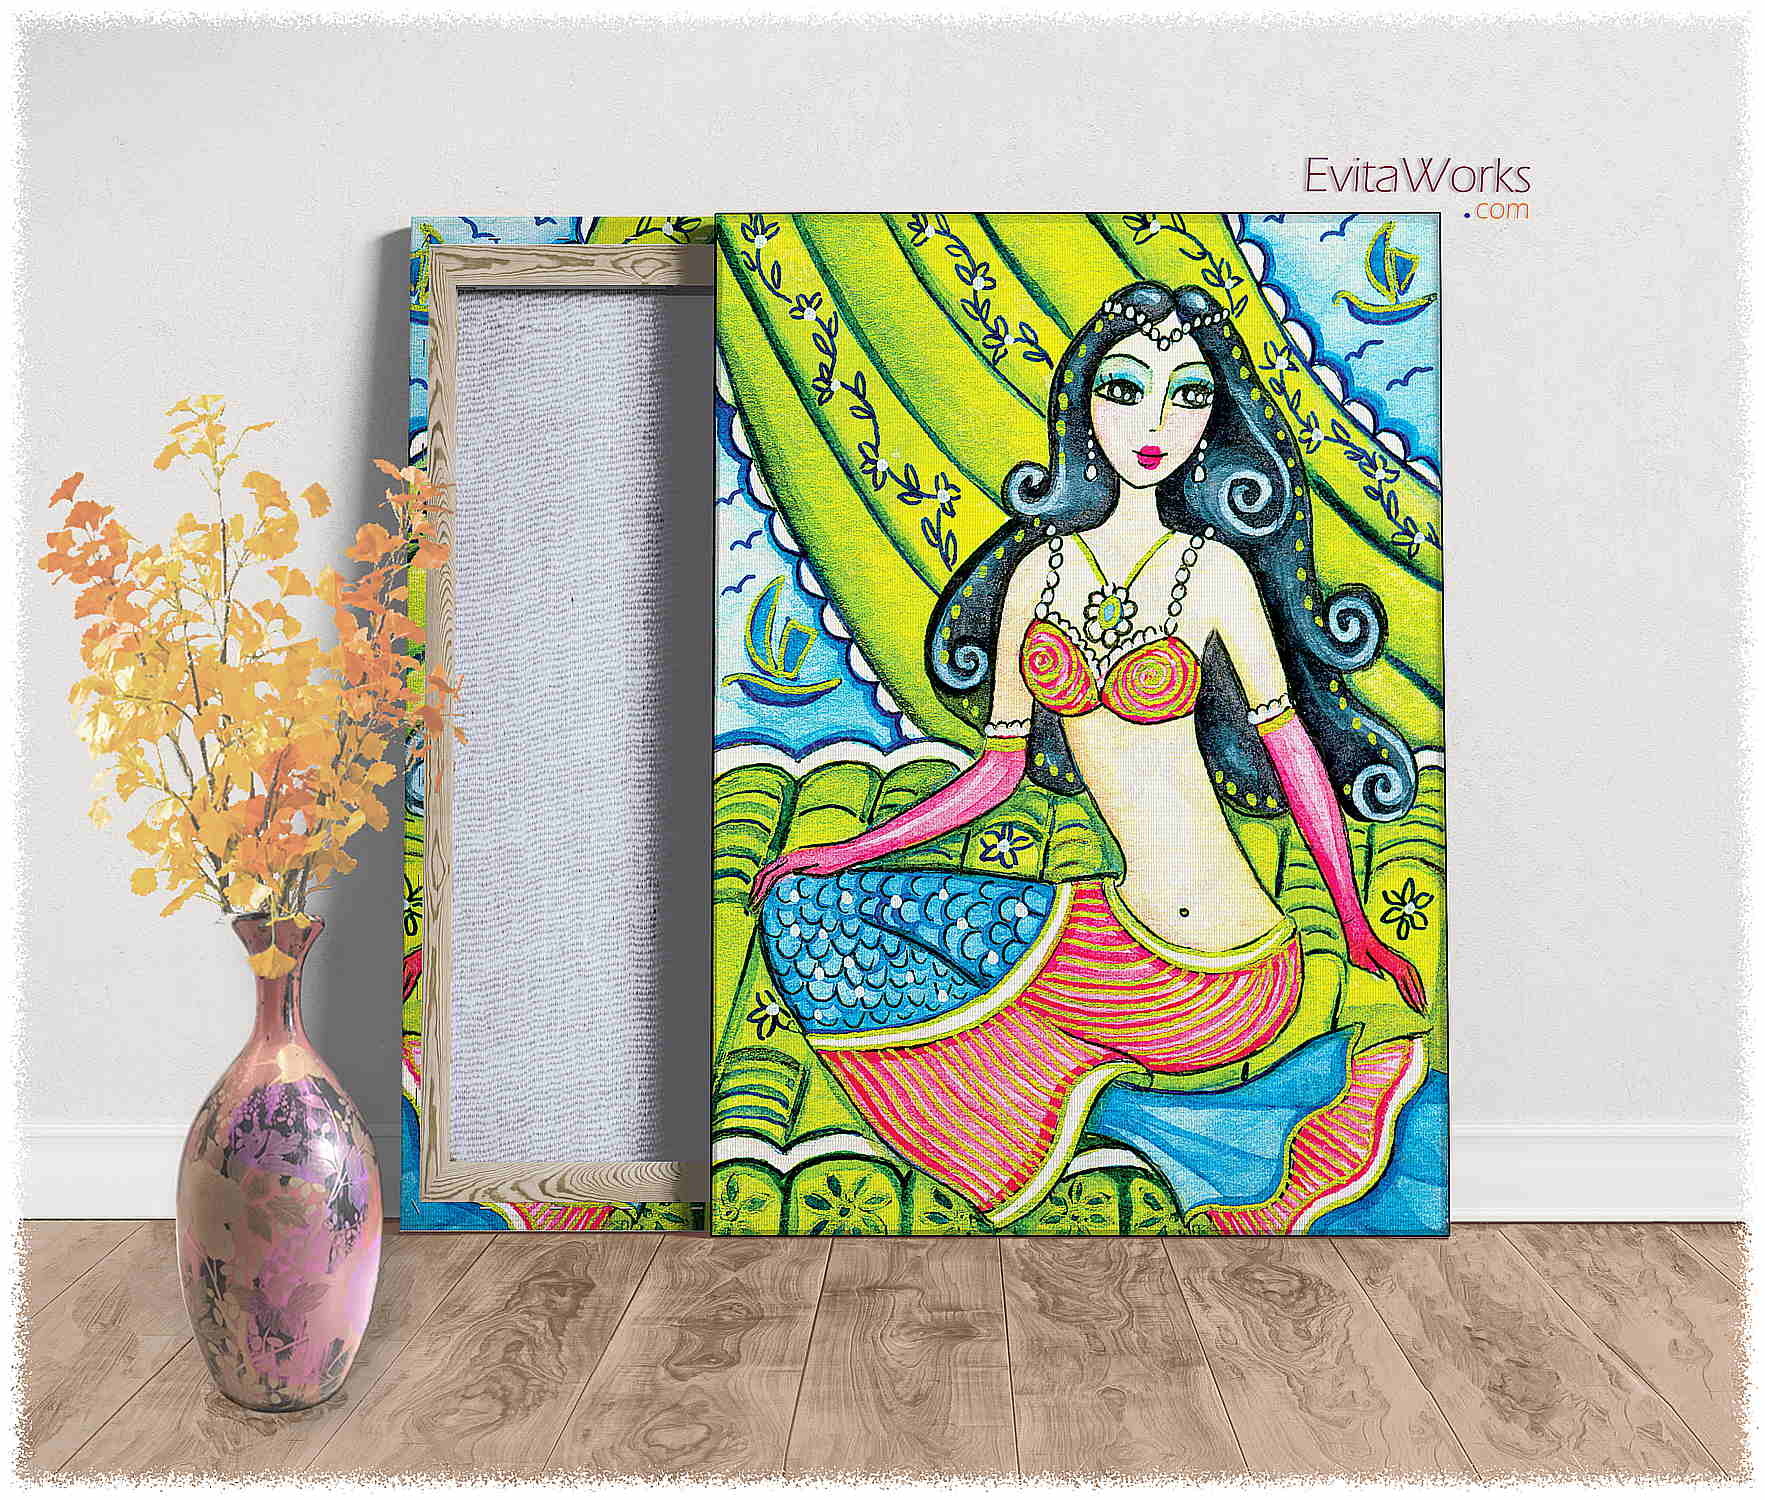 Hit to learn about "Mermaid 54, beautiful female creature" on canvases